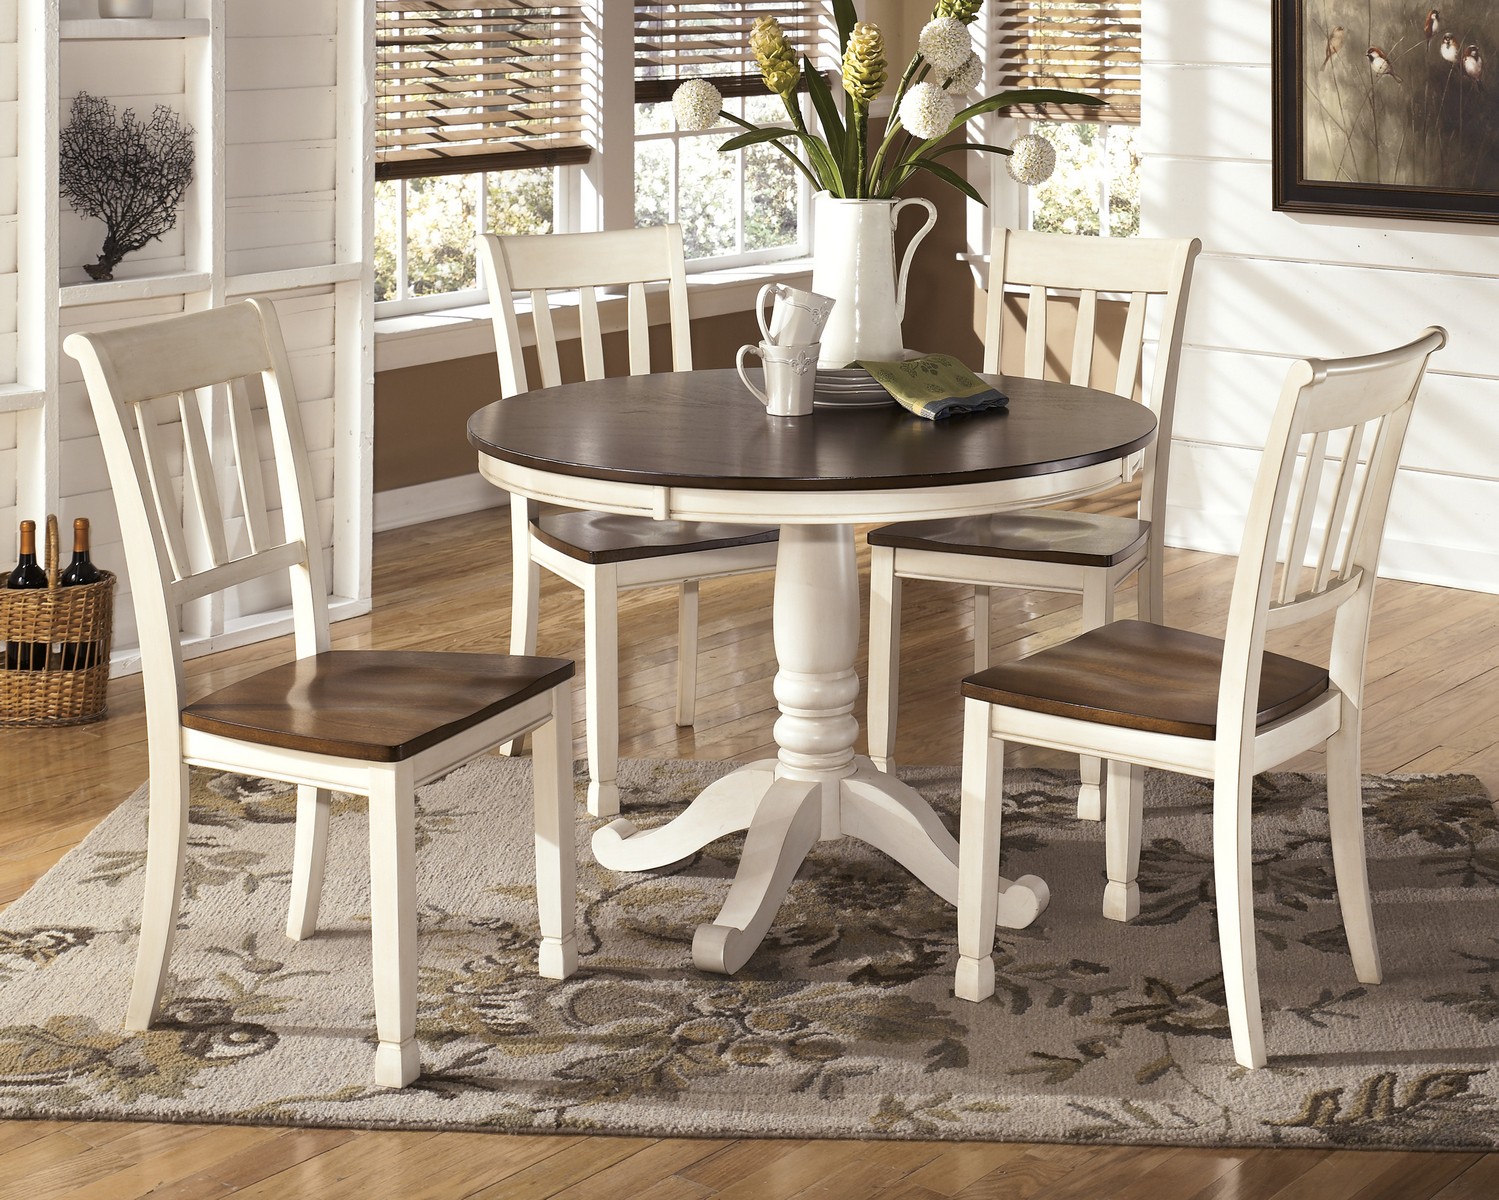 Ashley Whitesburg Round Dining Table ASHLEY-D583-15TB at Homelement.com